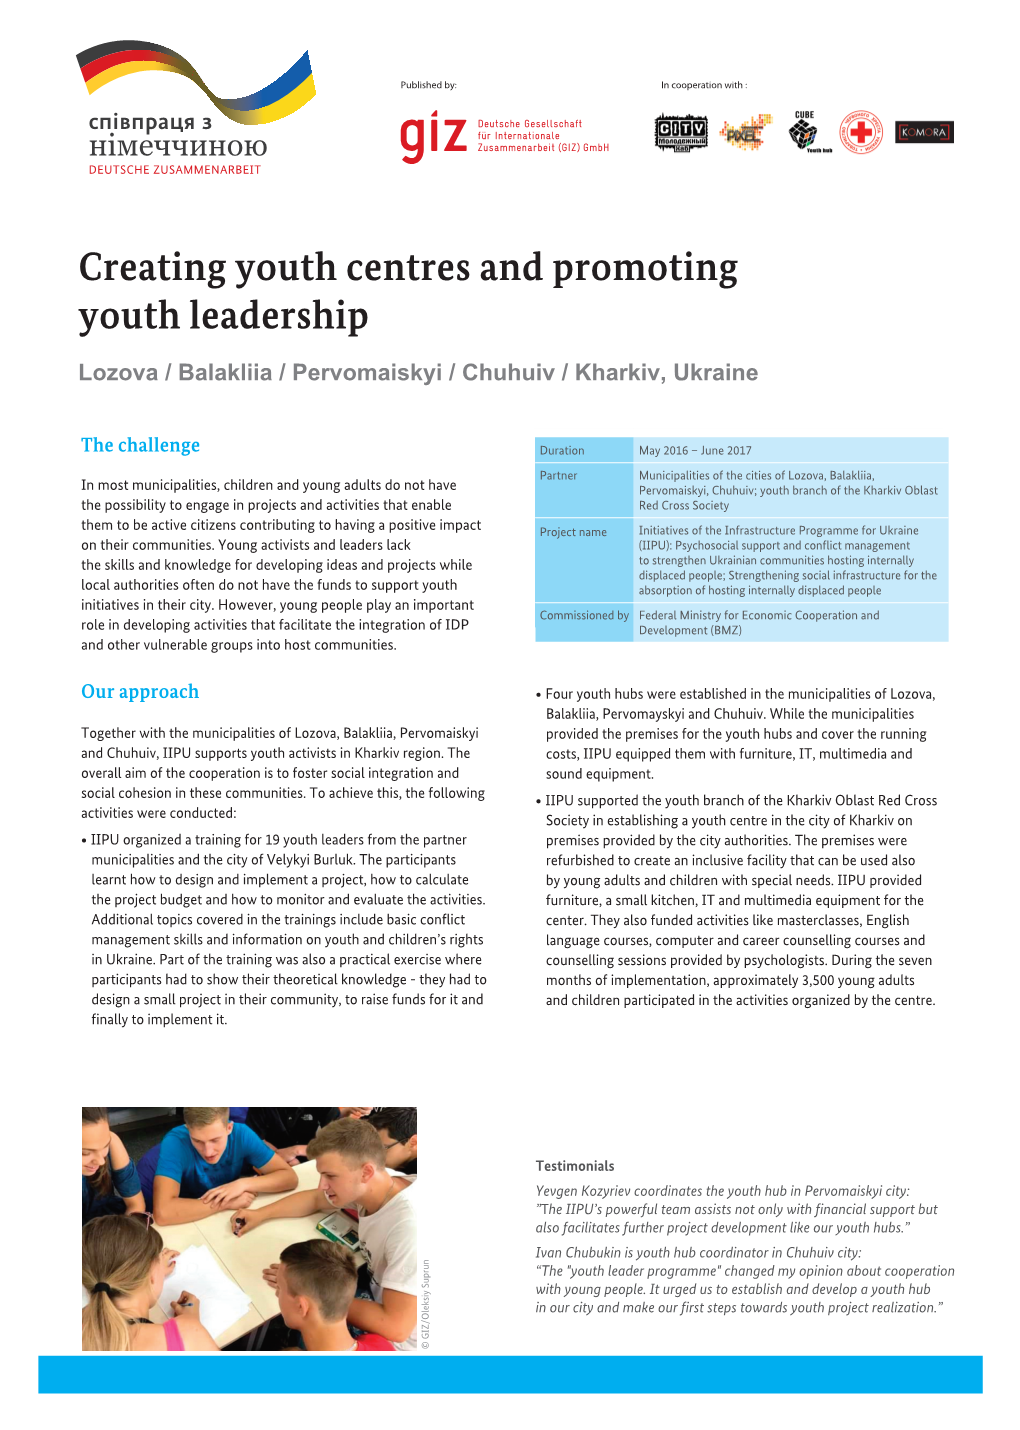 Creating Youth Centres and Promoting Youth Leadership